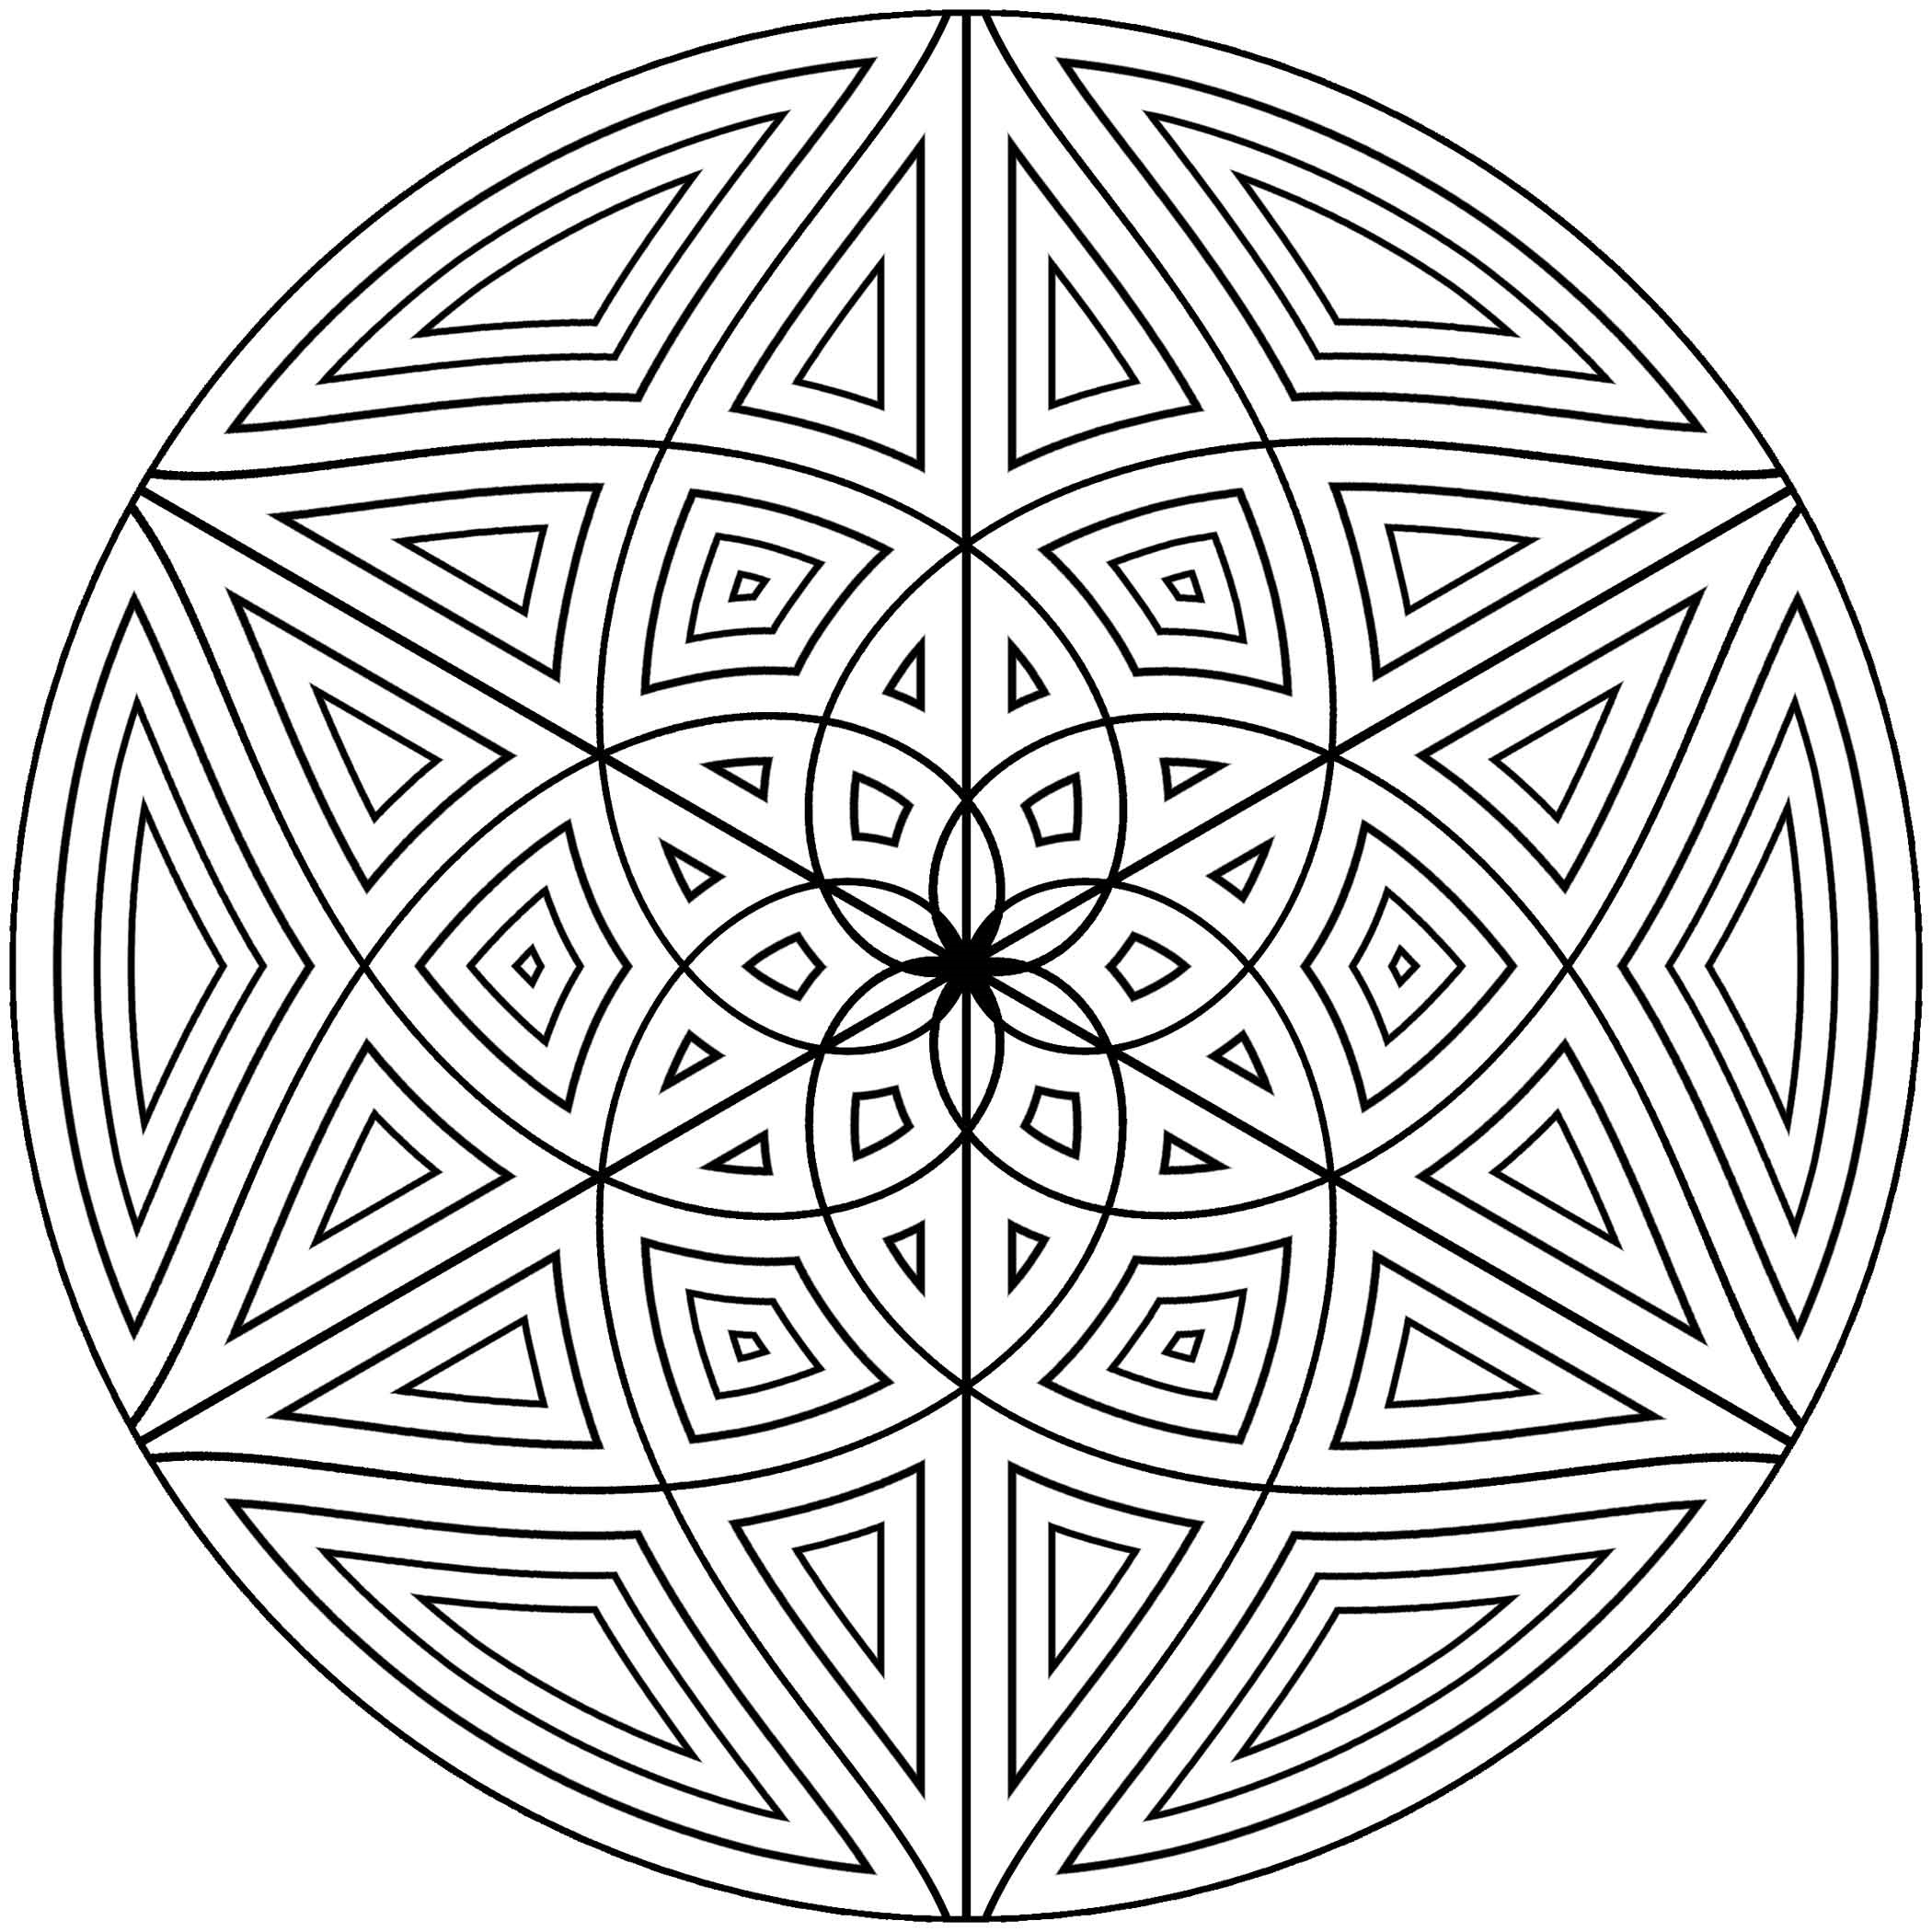 562 Simple Easy Geometric Coloring Pages for Kids